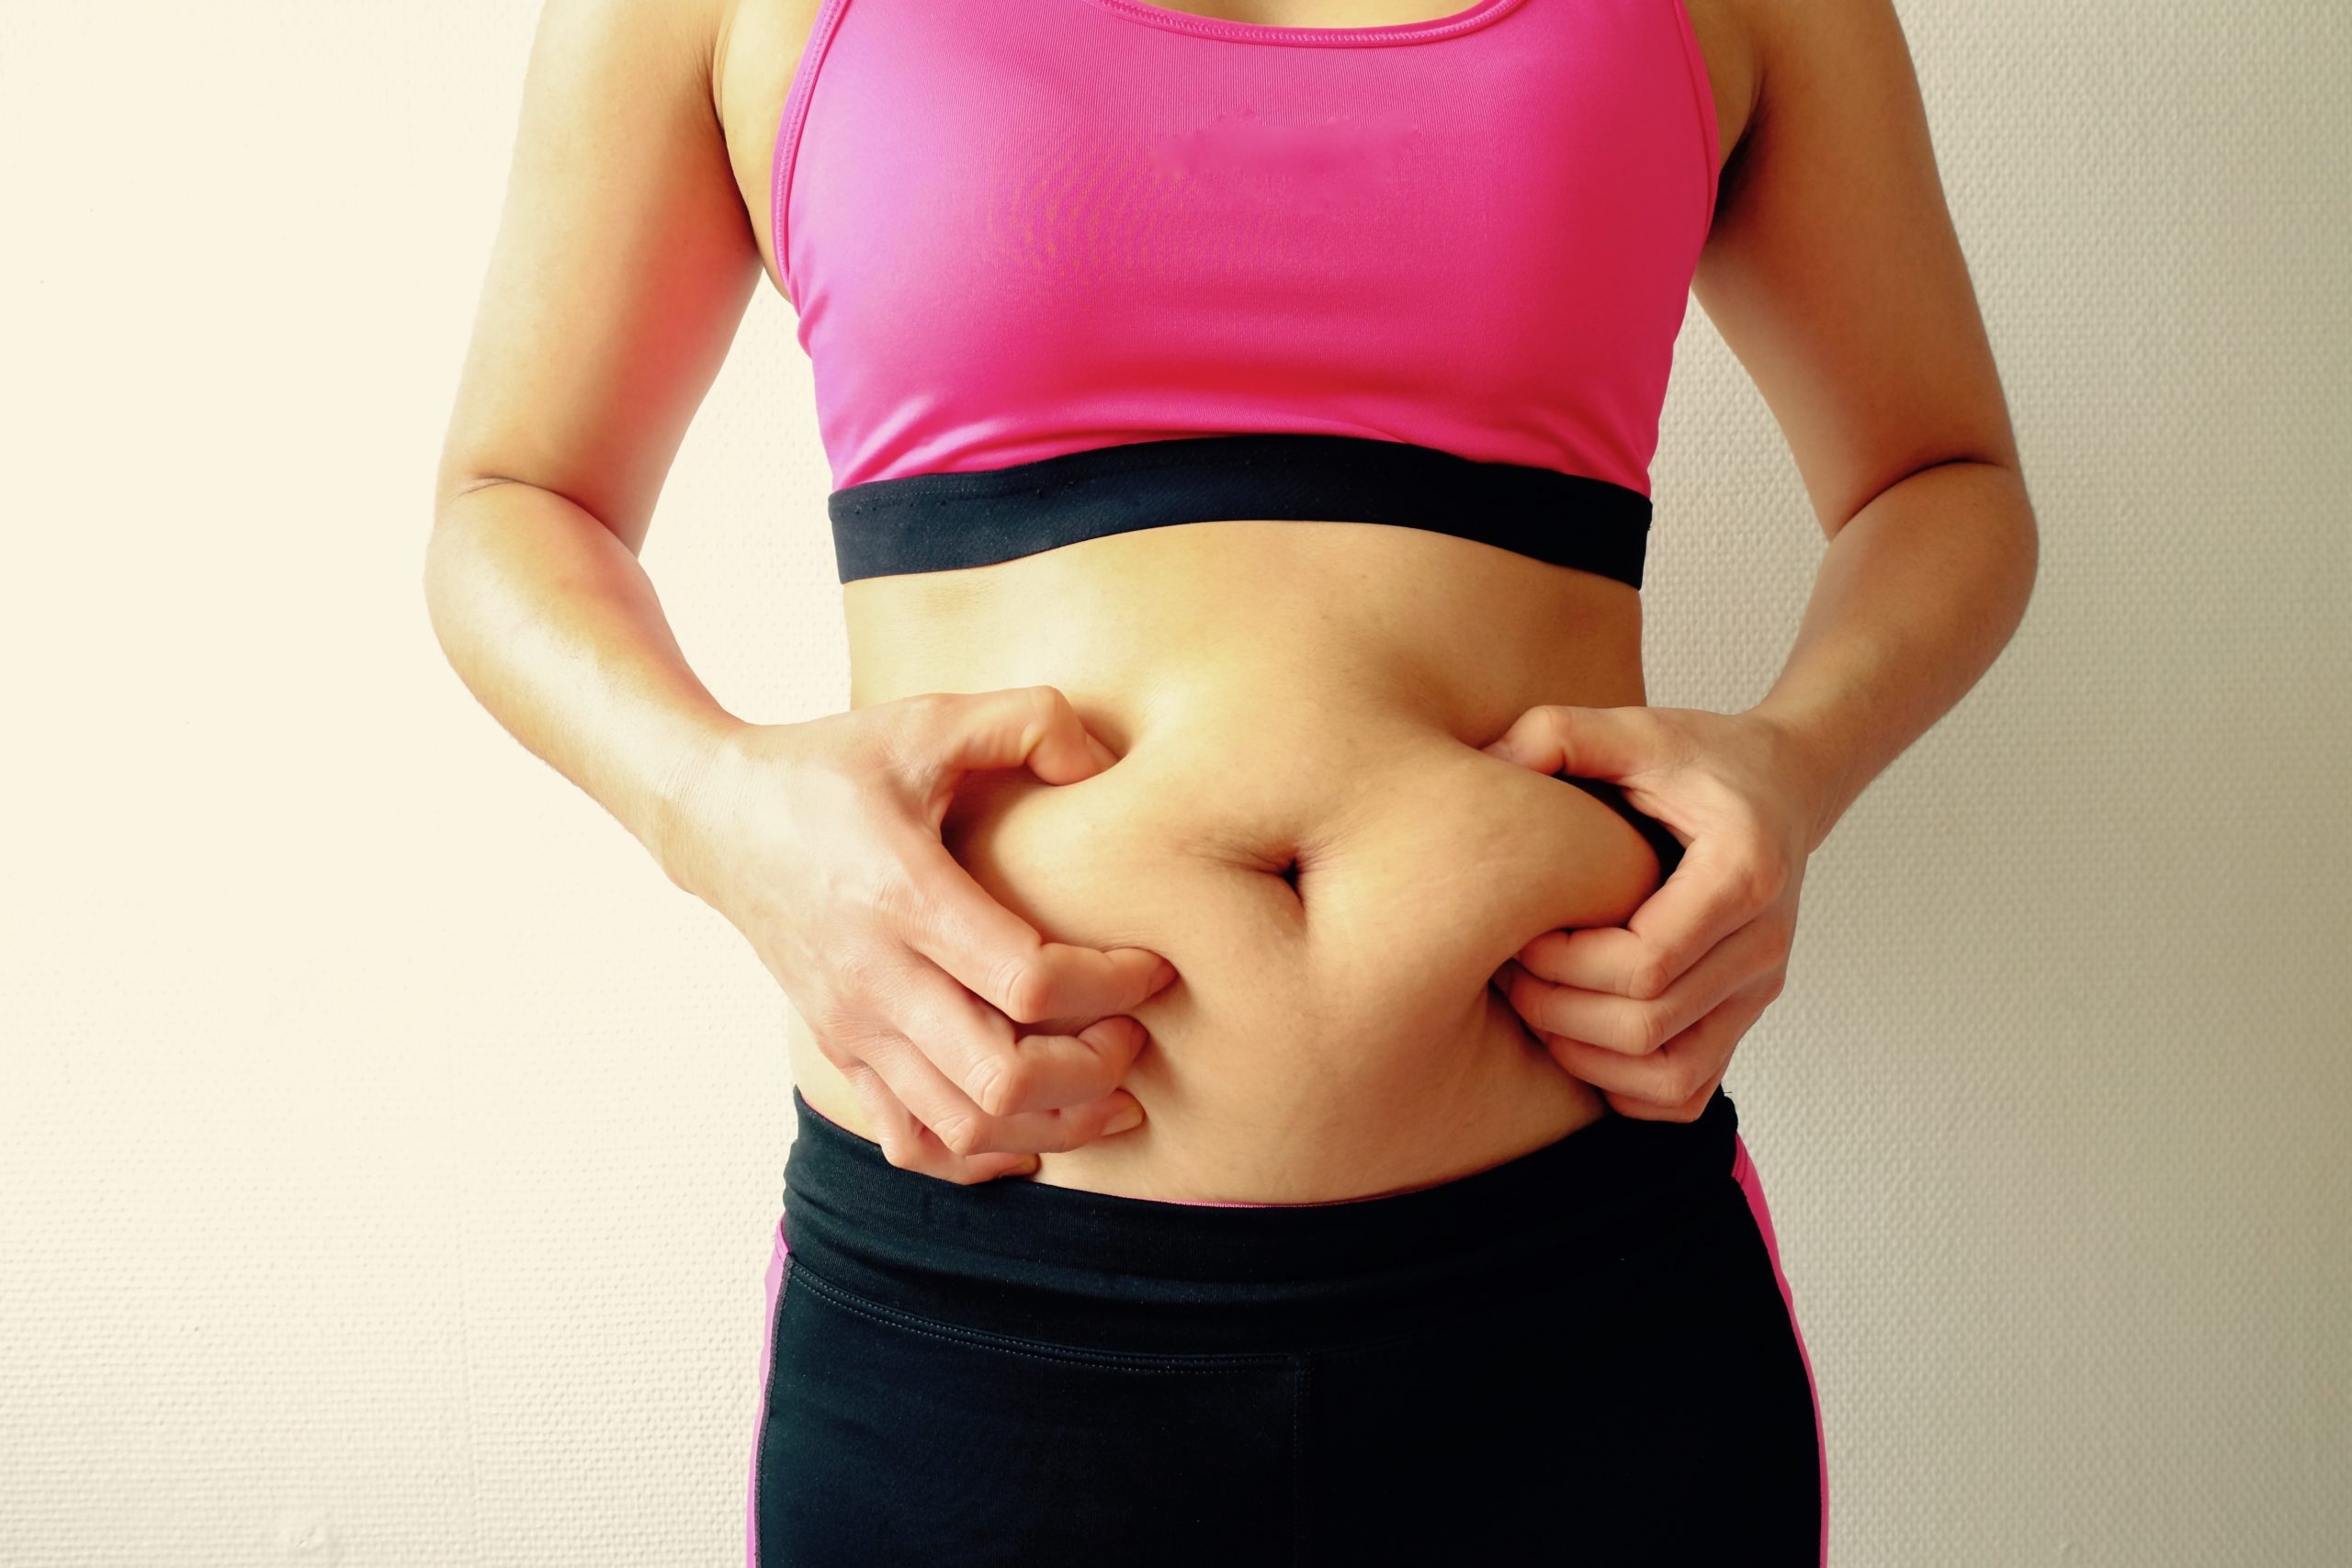 Can an Overweight Person Get a Tummy Tuck?